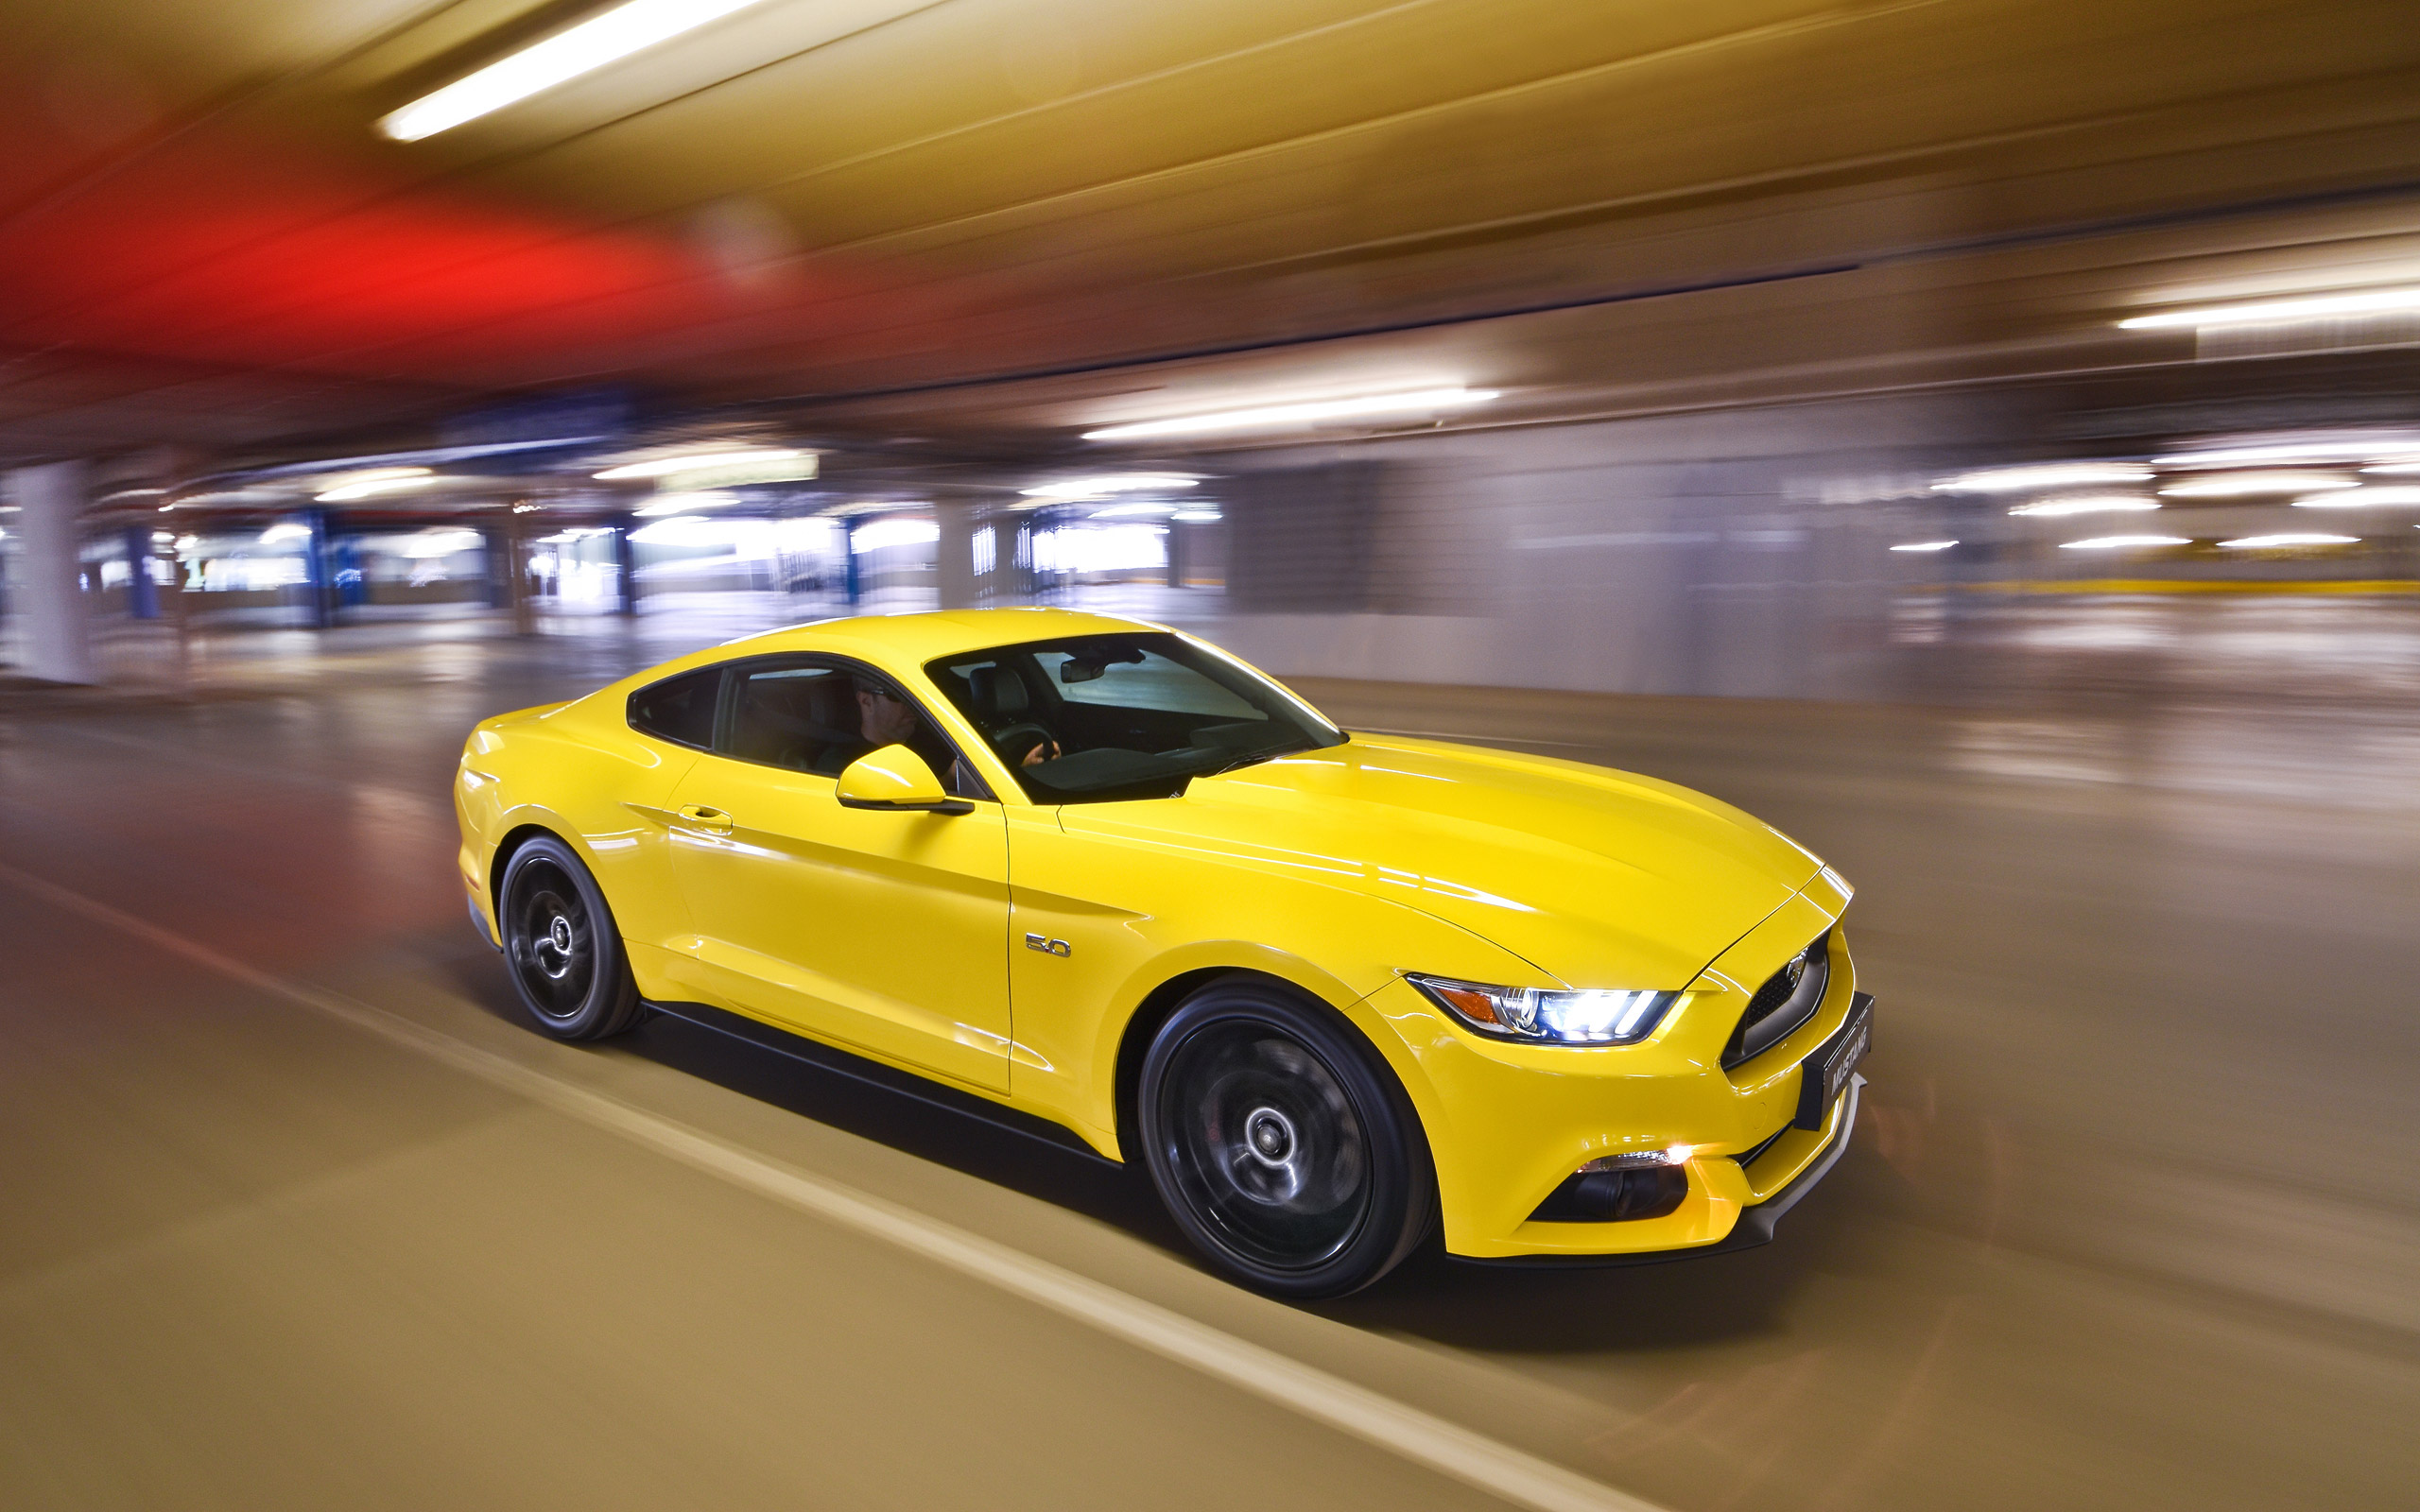 Mustang Of The Day: 2015 Ford Mustang